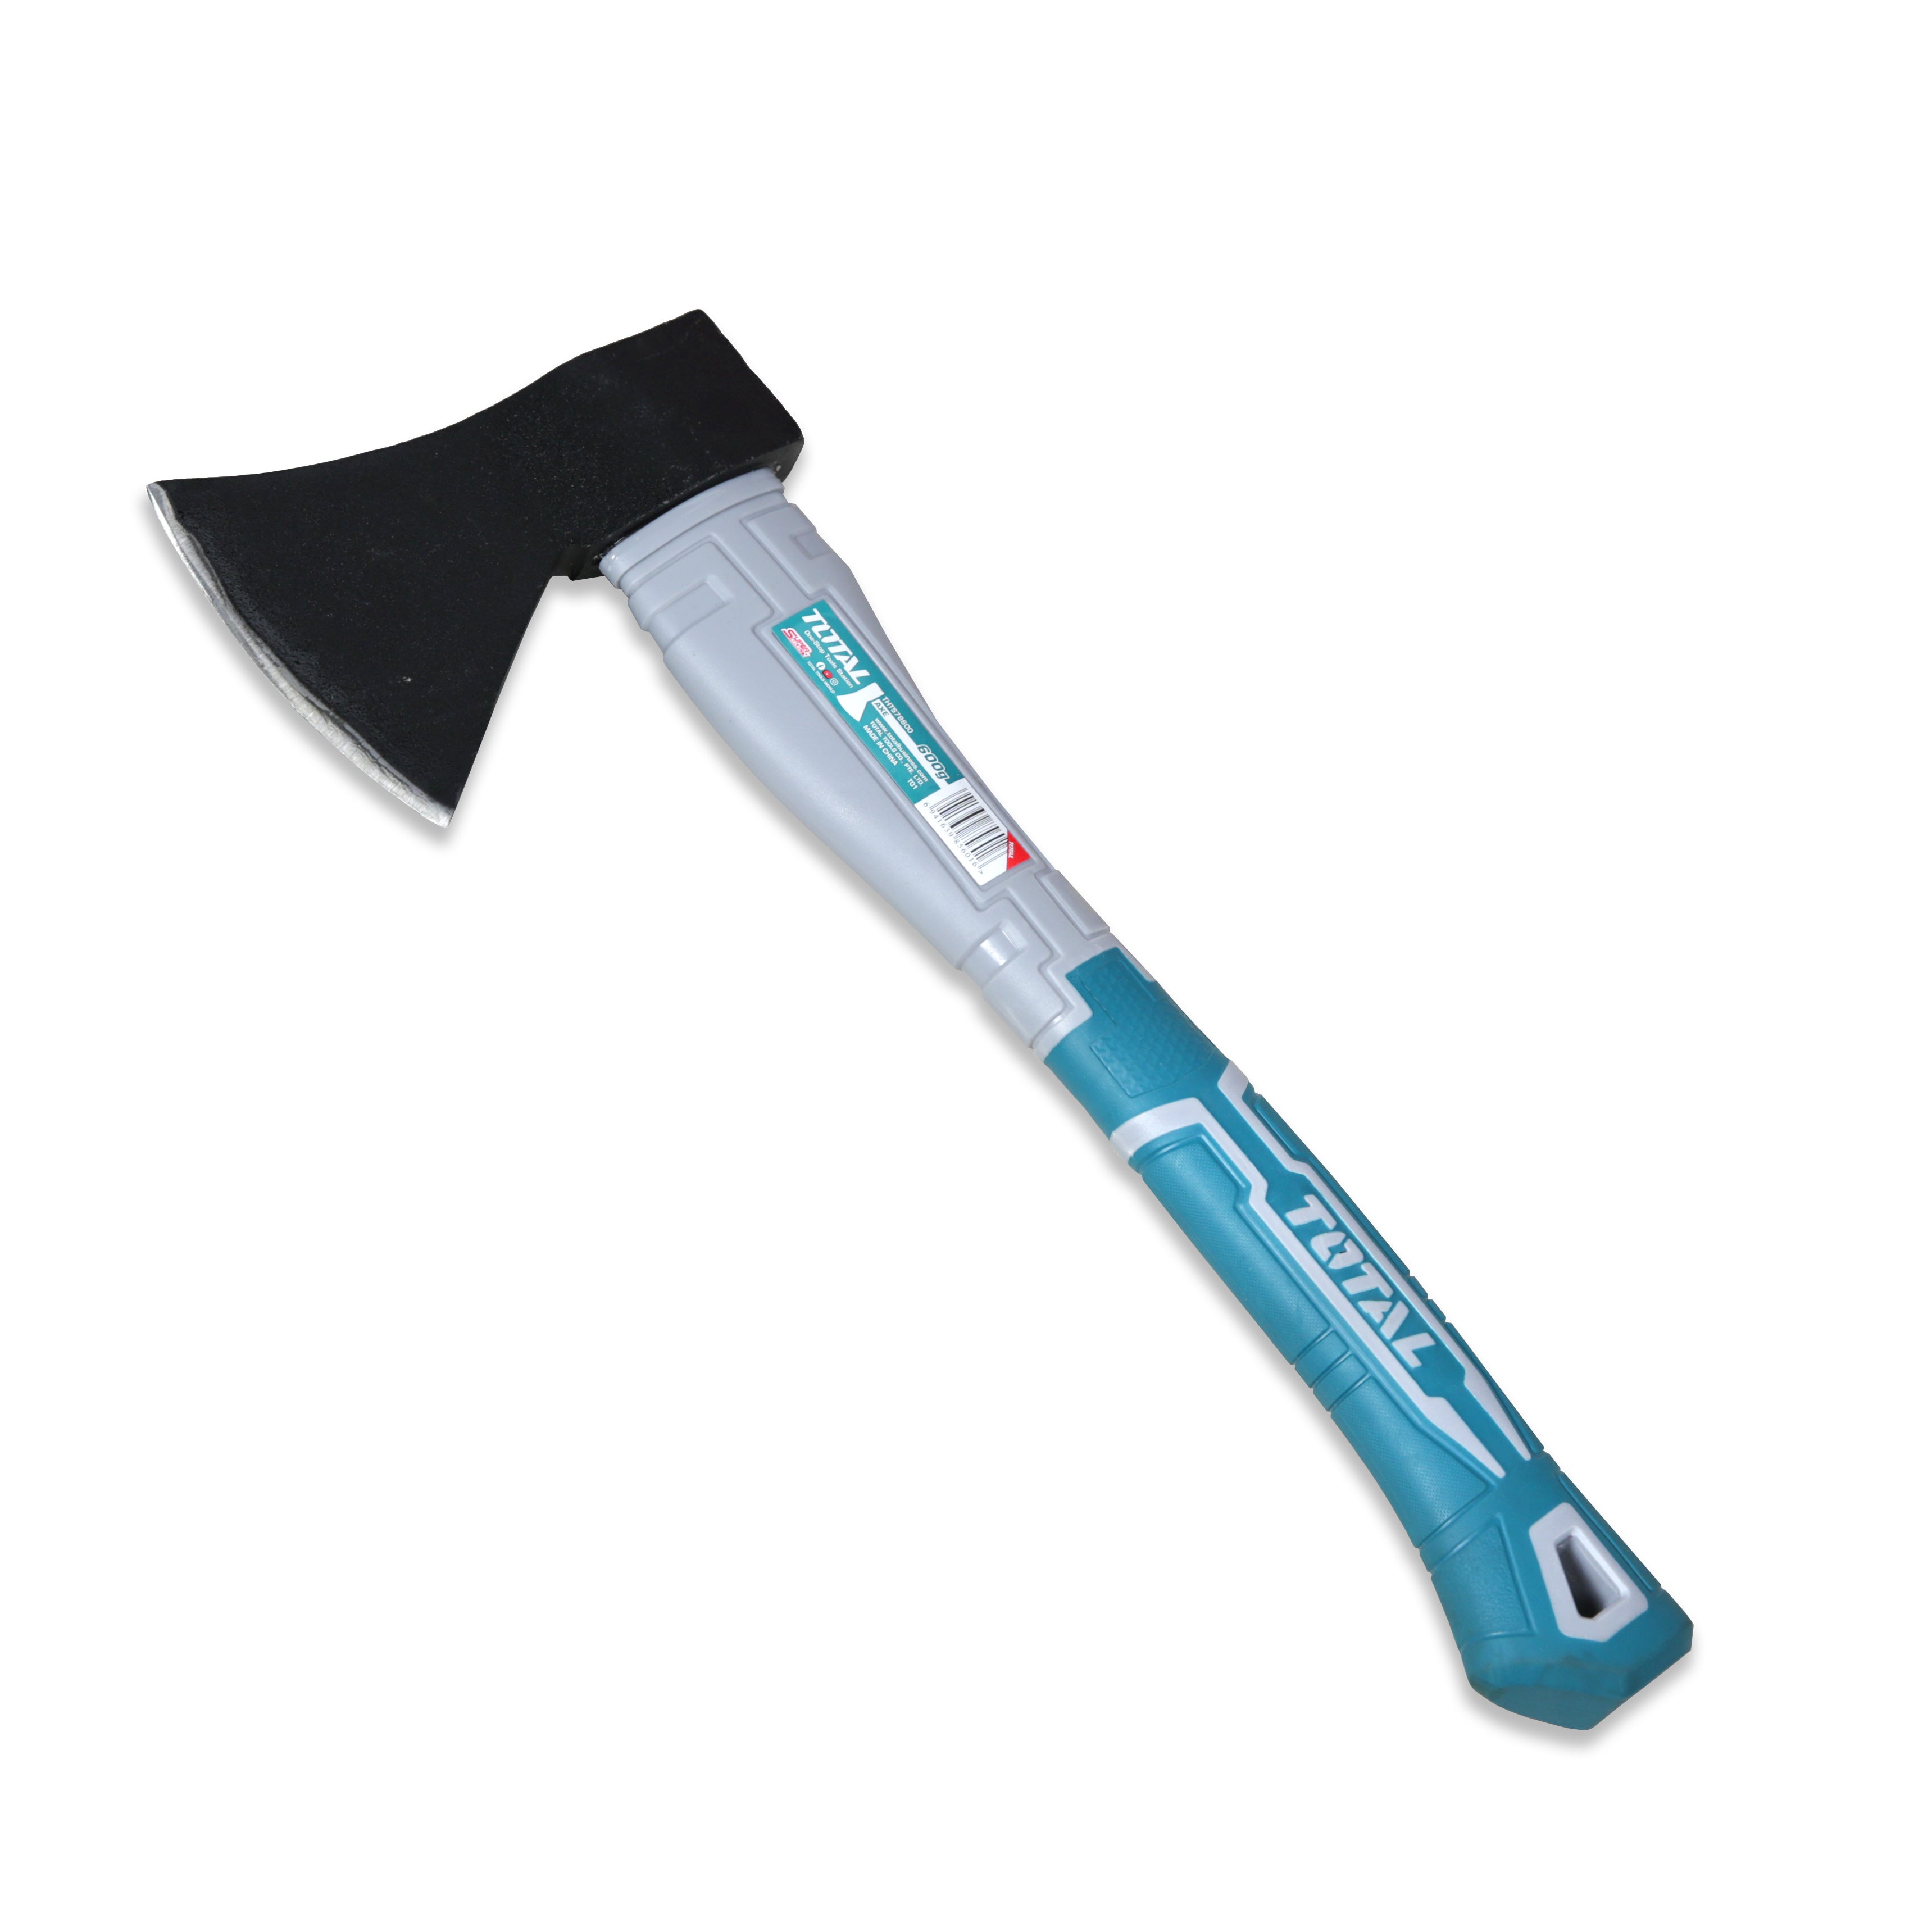 Total Super Select Axe 600g - THTS78600